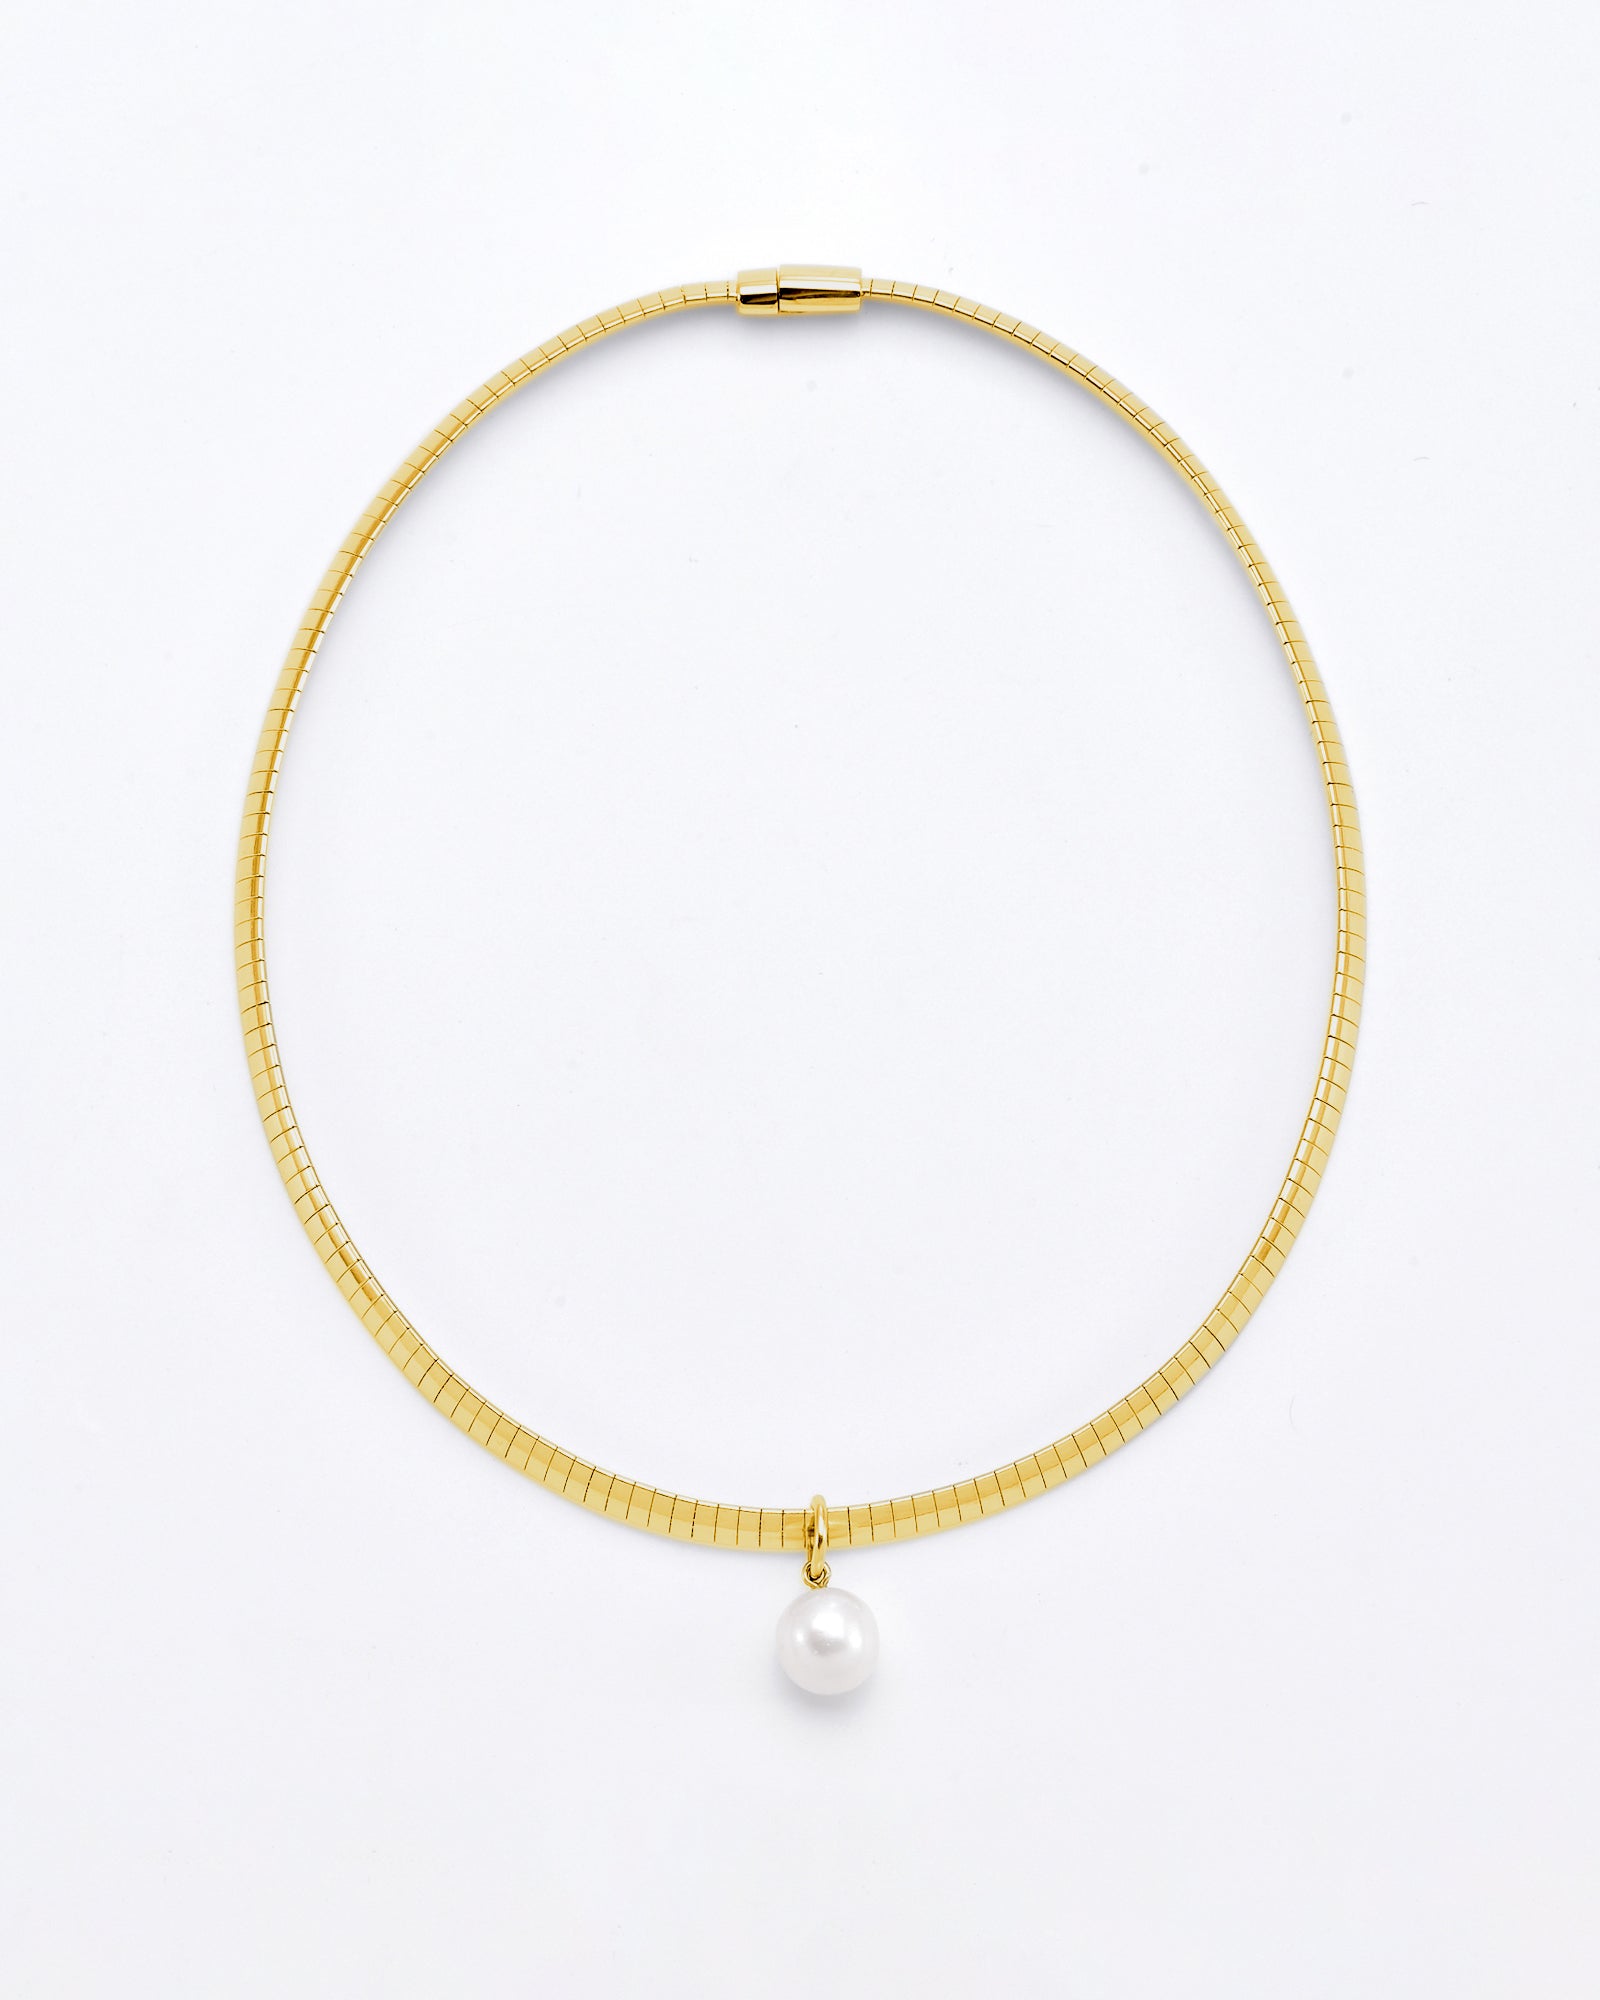 A simple and elegant For Art's Sake® Orbit Necklace Gold made of 24k gold, featuring a smooth, shiny finish and a single dangling freshwater pearl pendant at the center. The necklace is shown against a plain white background.